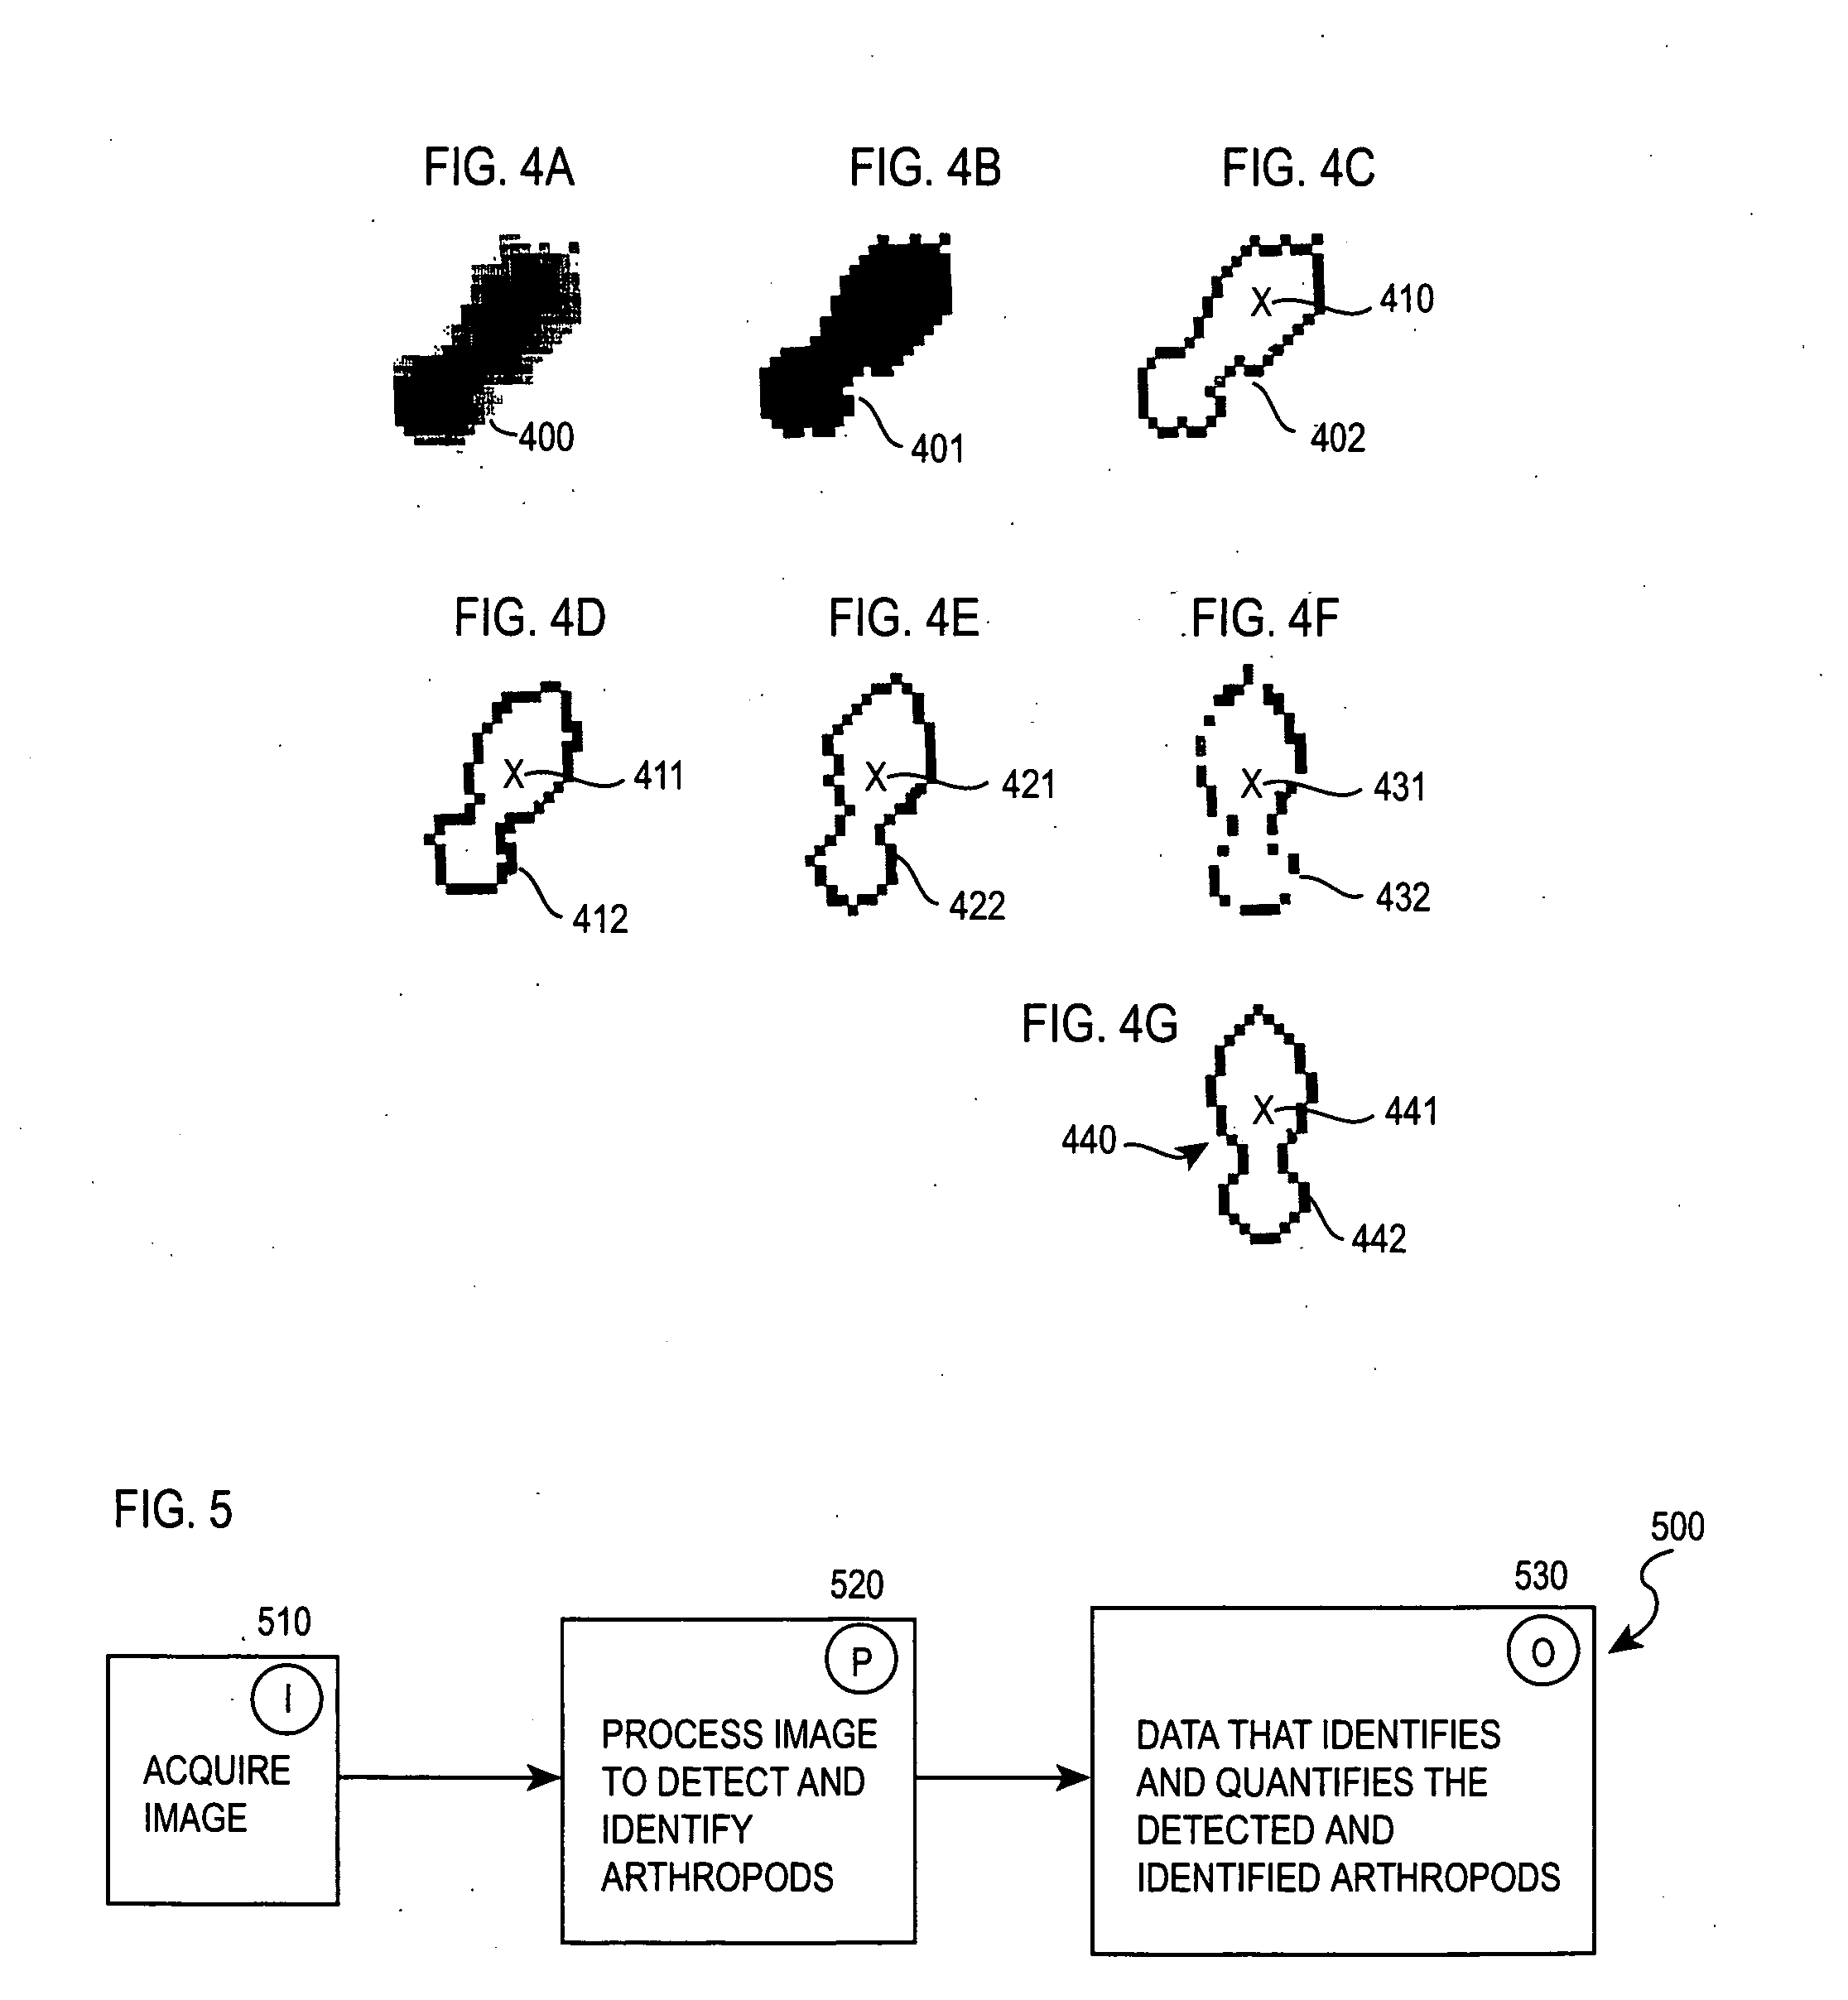 Method and system for detecting and classifying objects in images, such as insects and other arthropods